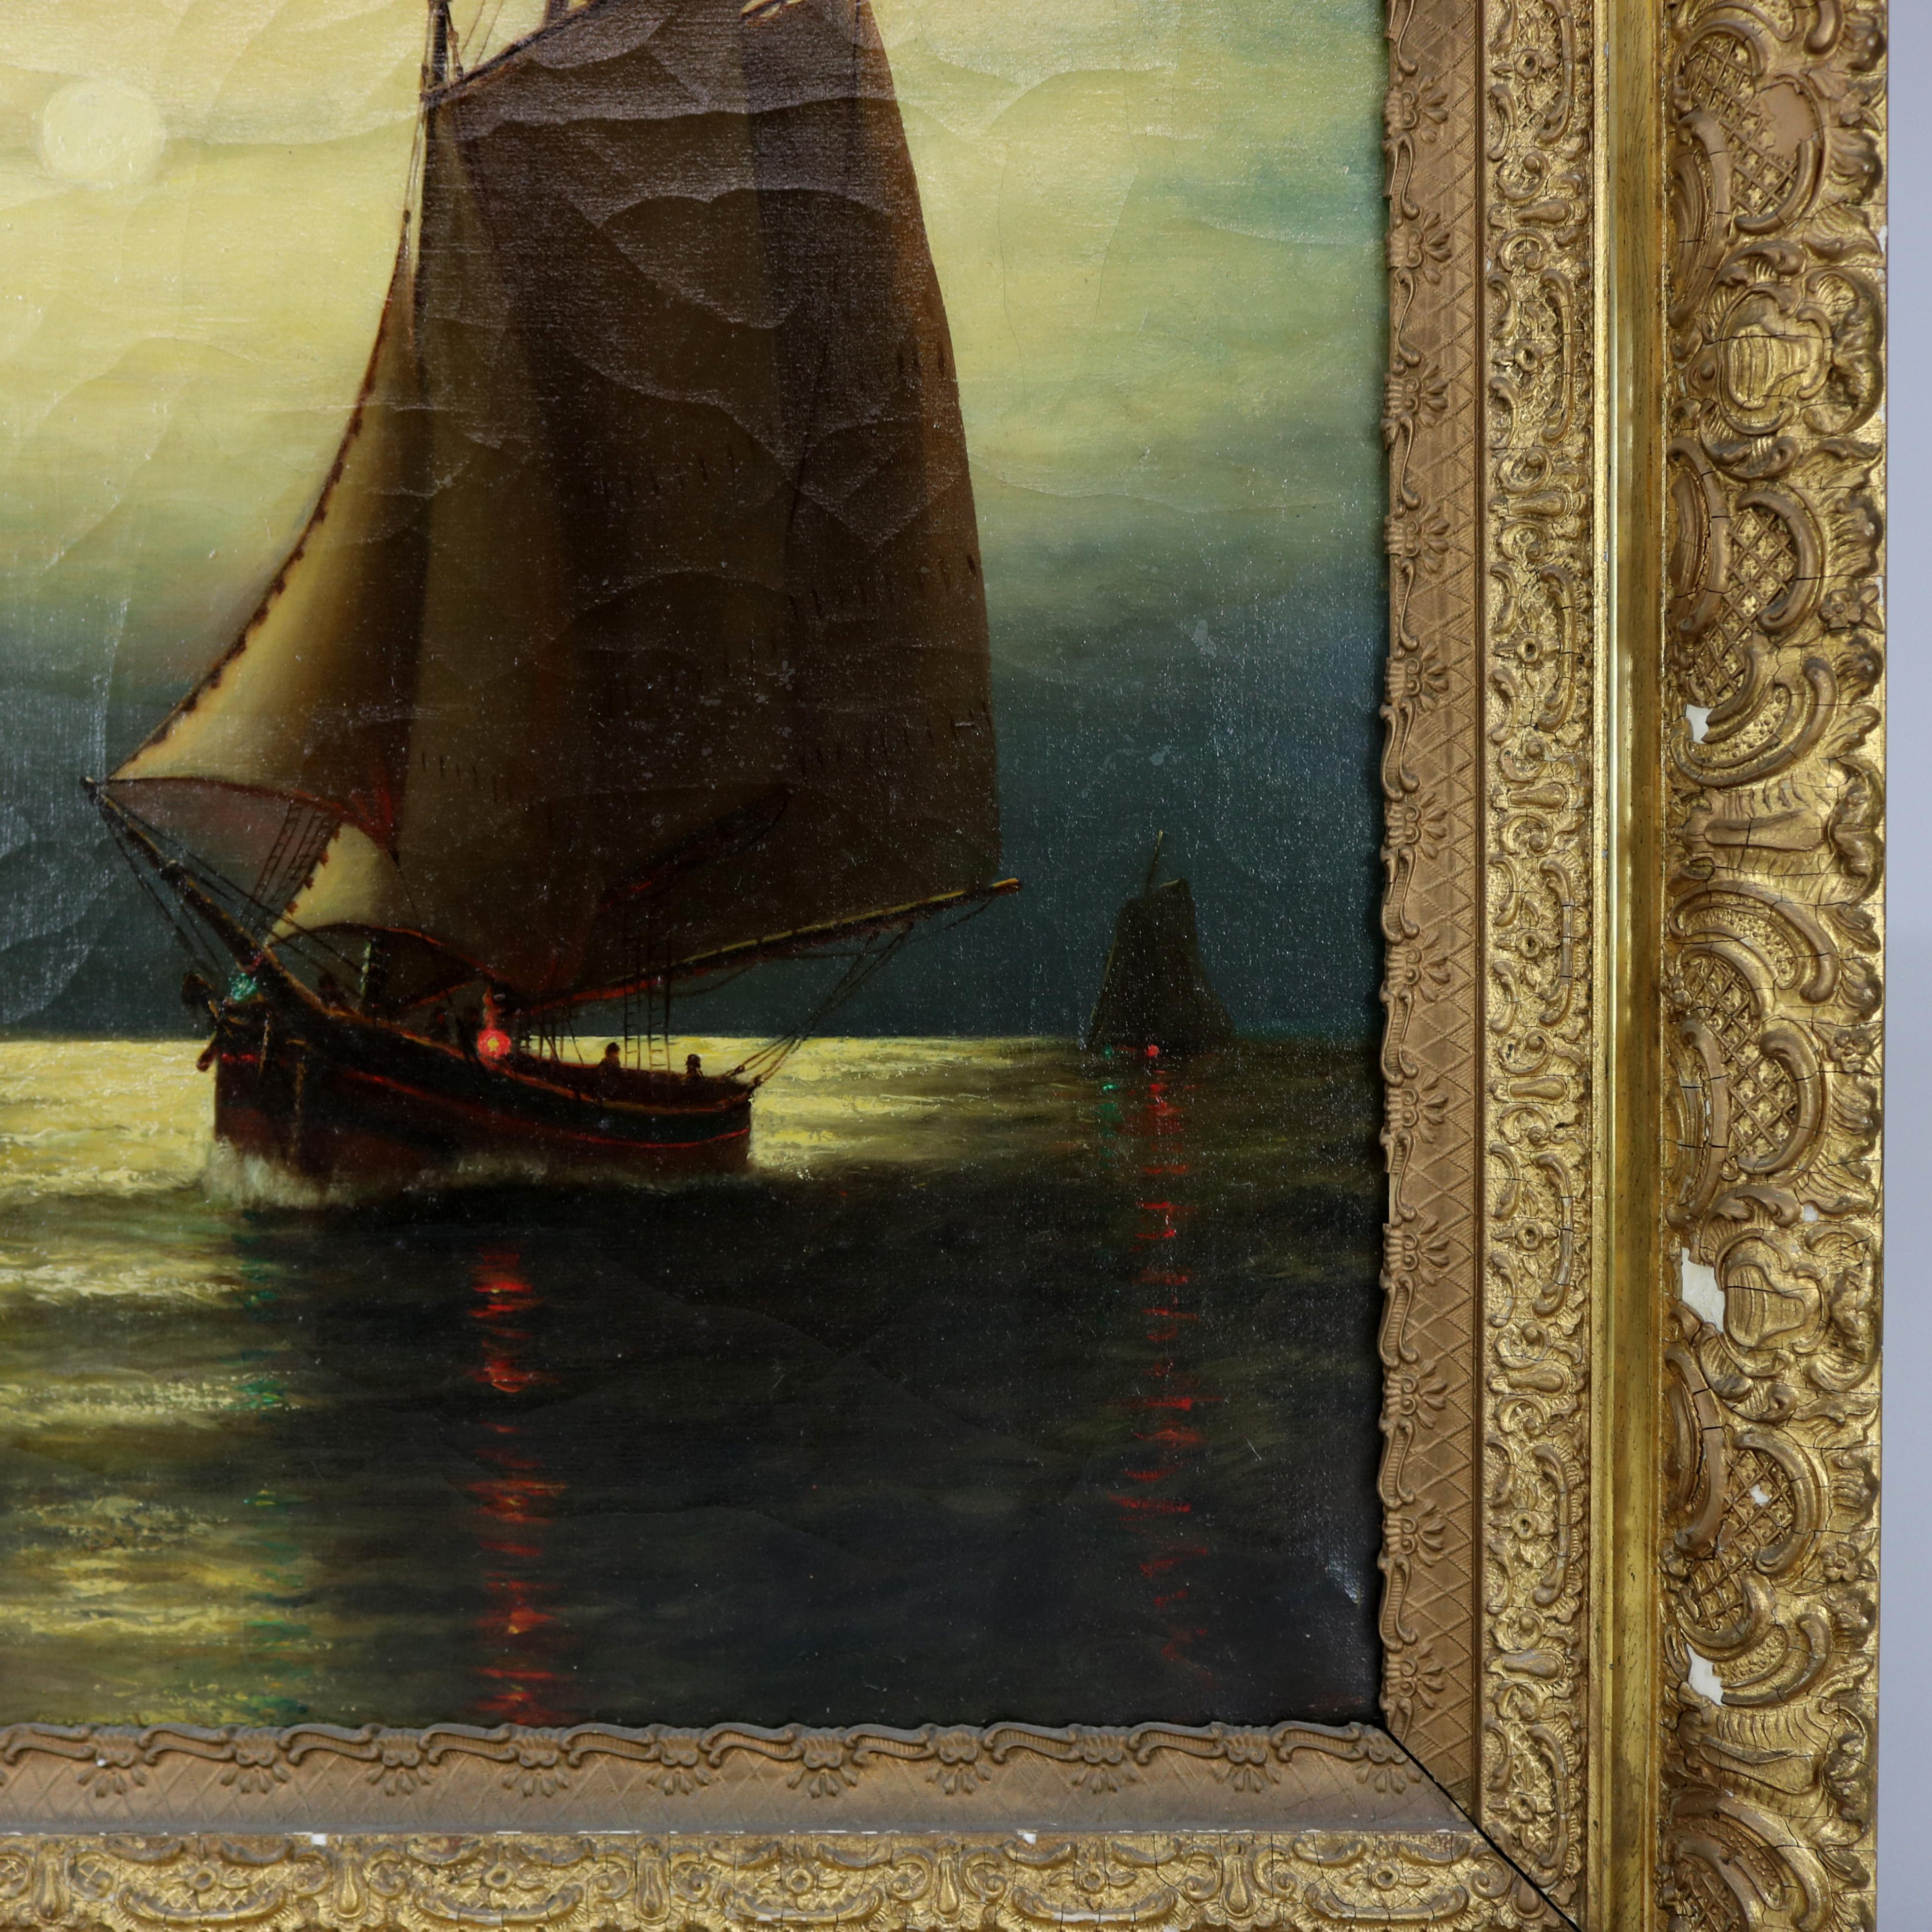 Hand-Painted Antique Painting, Seascape with Moonlit Sailboat by Wesley Webber, circa 1900